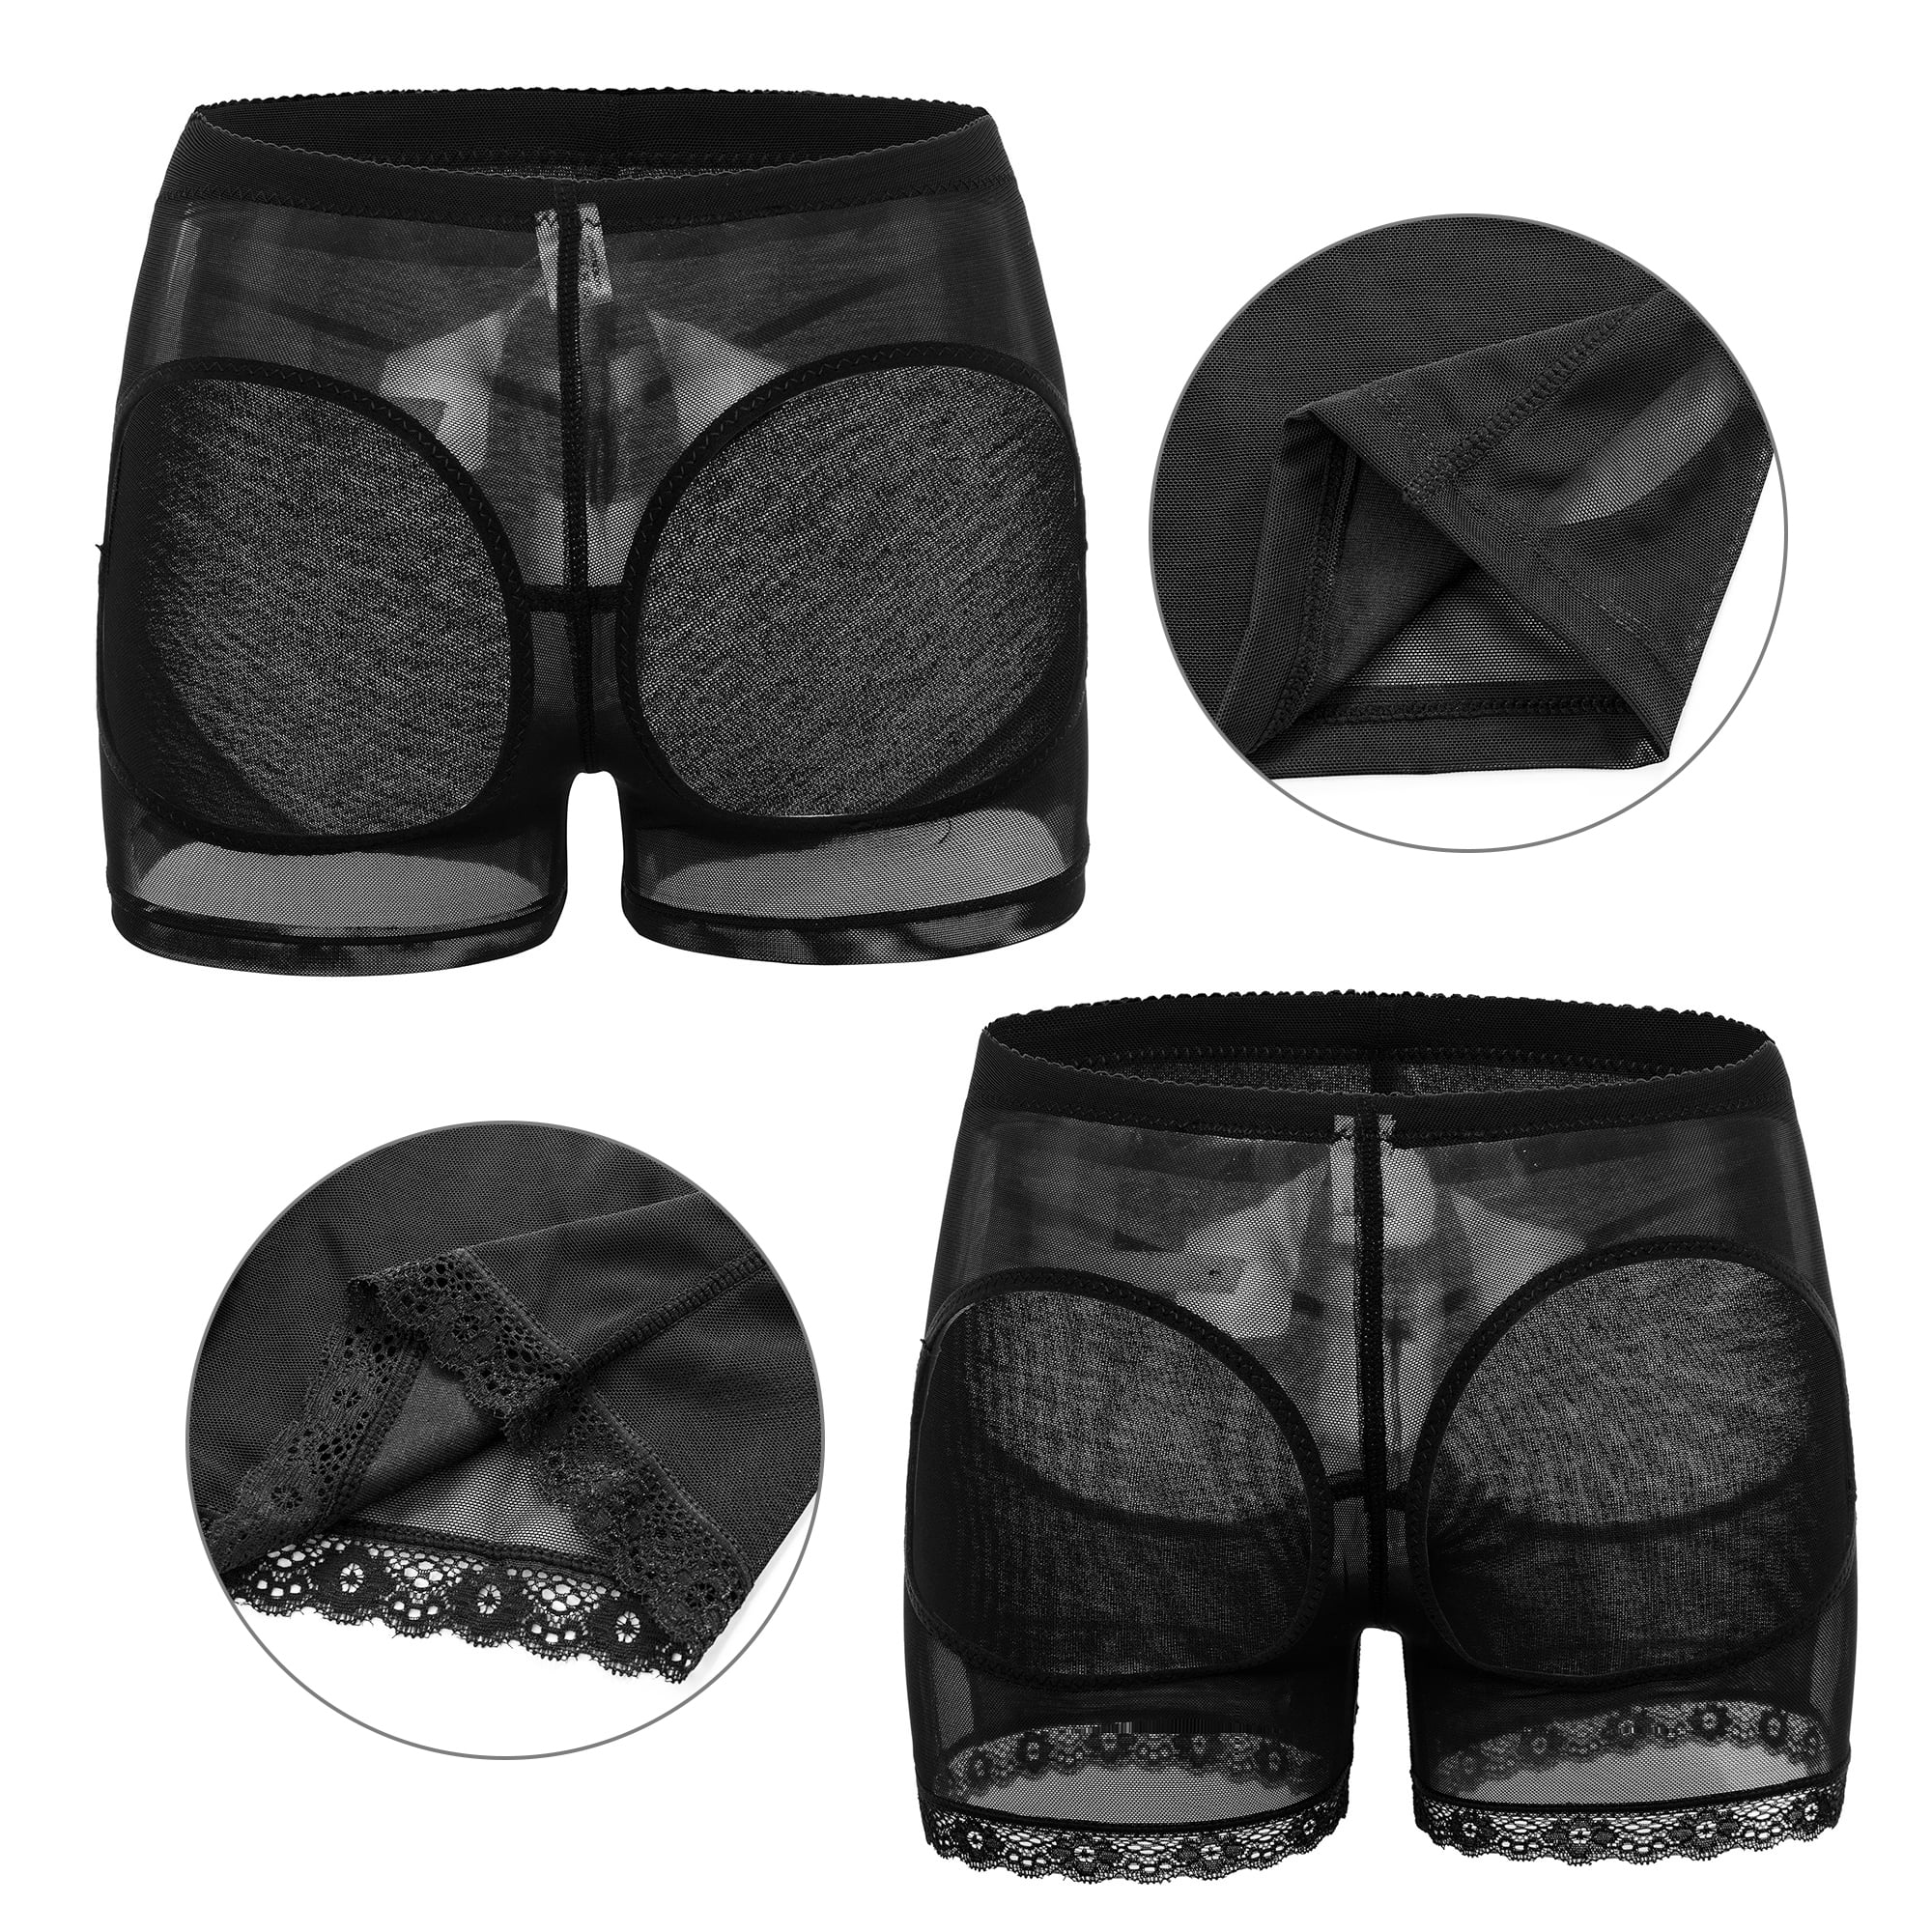 Male Soft Comfortable Lace Booty Short Underwear in Cream or Black